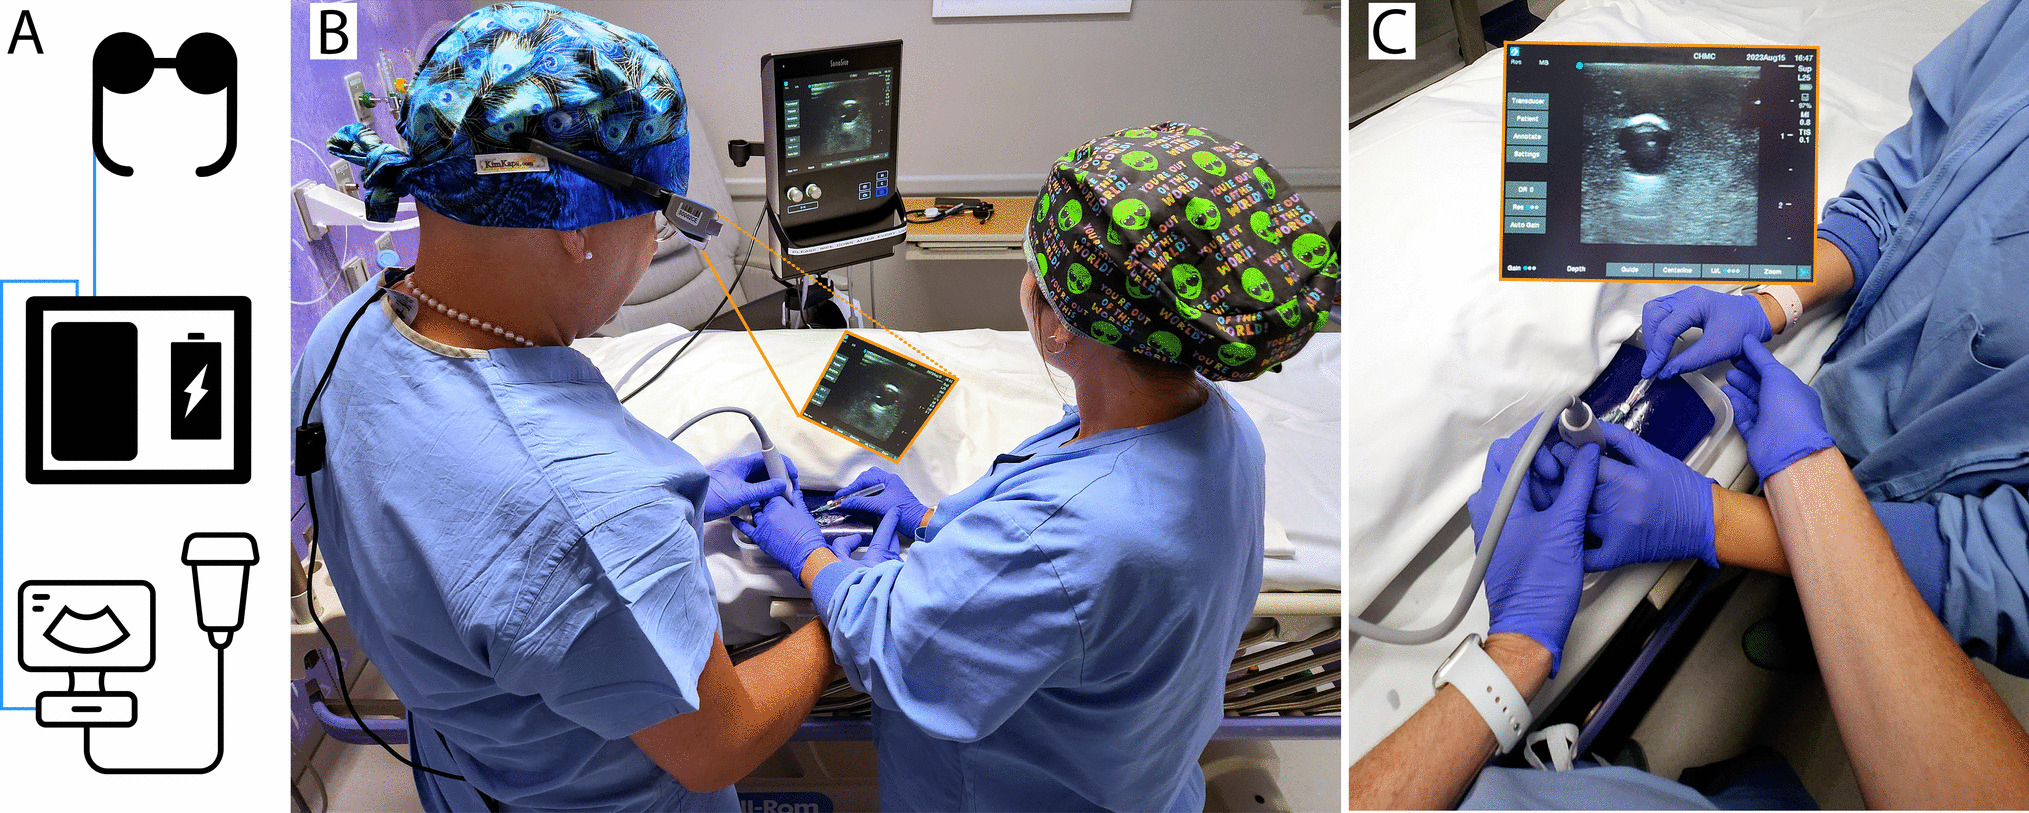 Revolutionizing the Teaching of Ultrasound-Guided Vascular Access Procedures with Augmented Reality Headsets